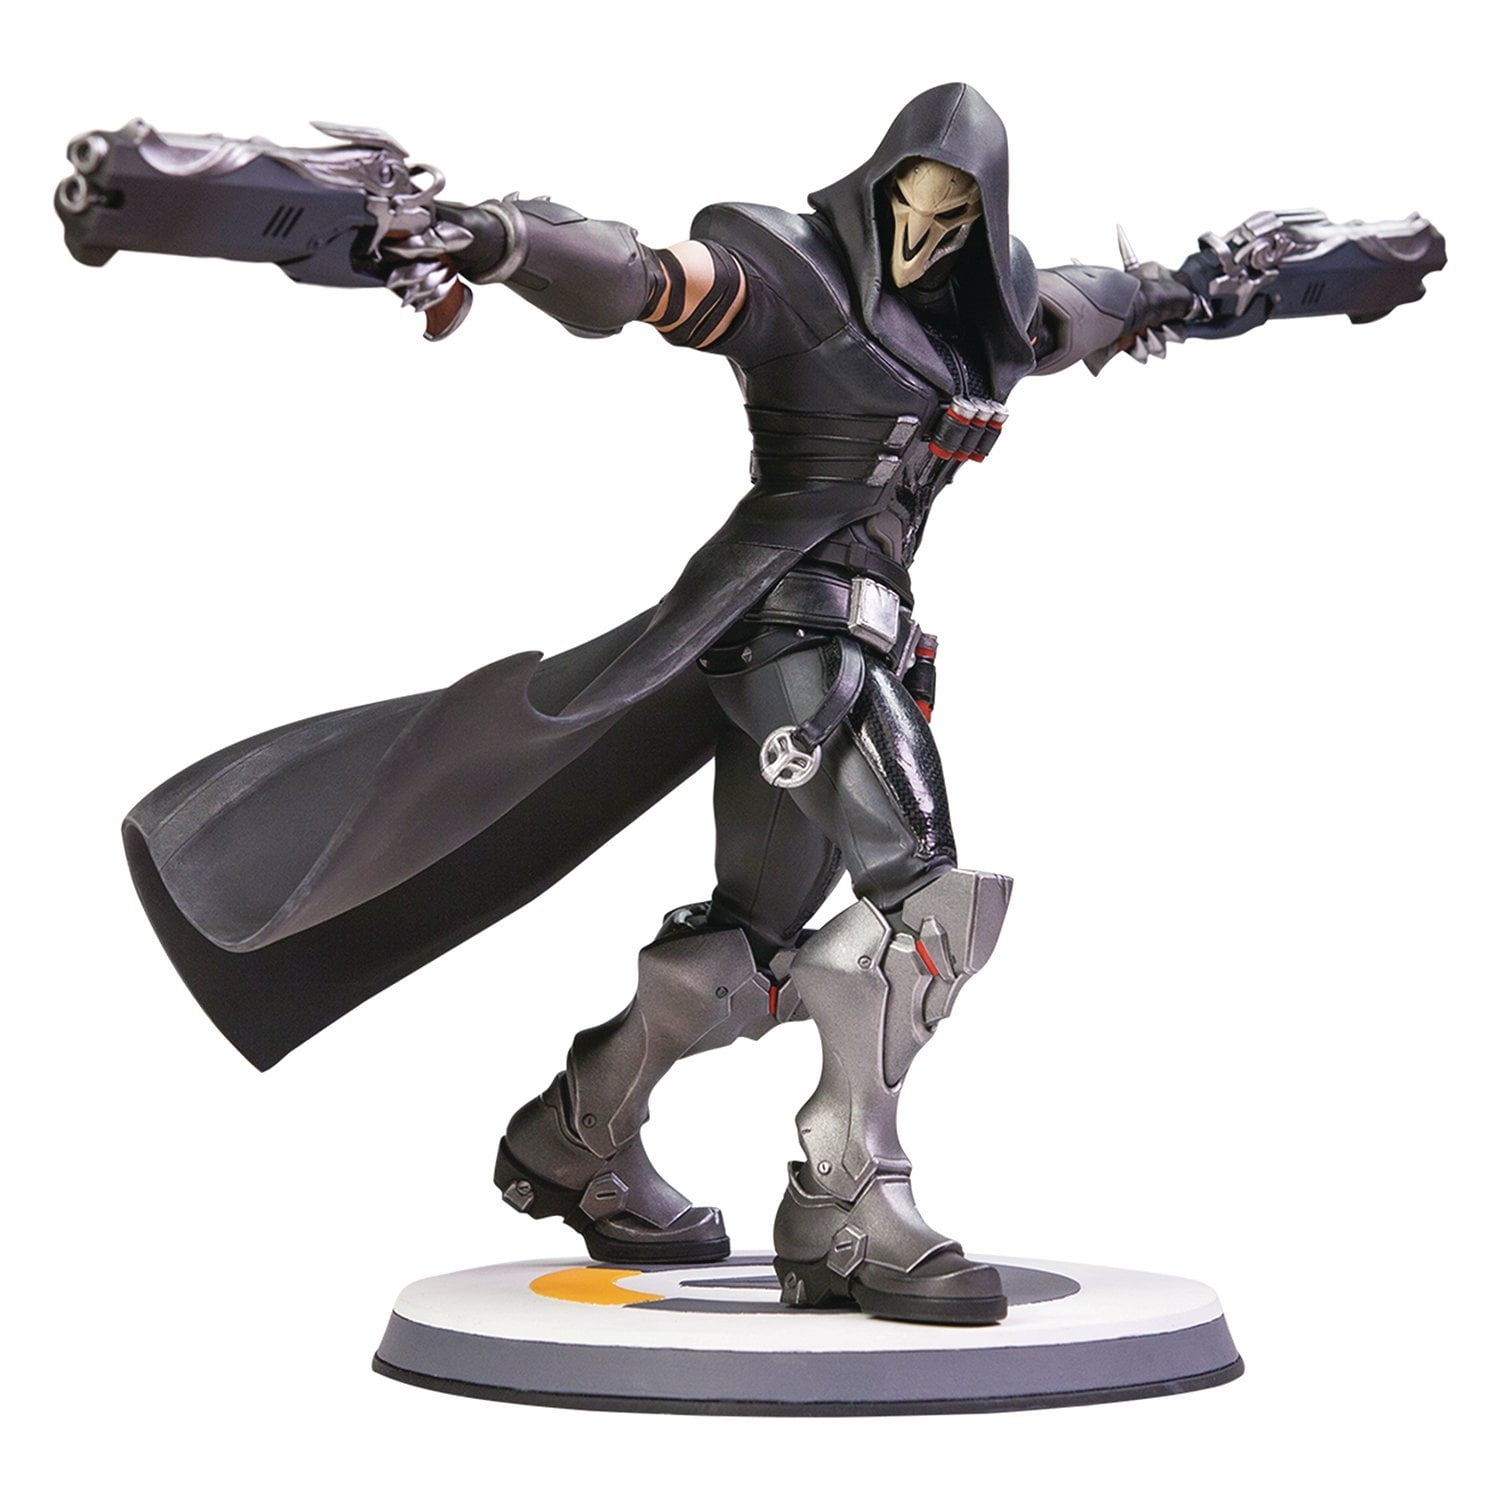 Download Overwatch Reaper Face Reveal.